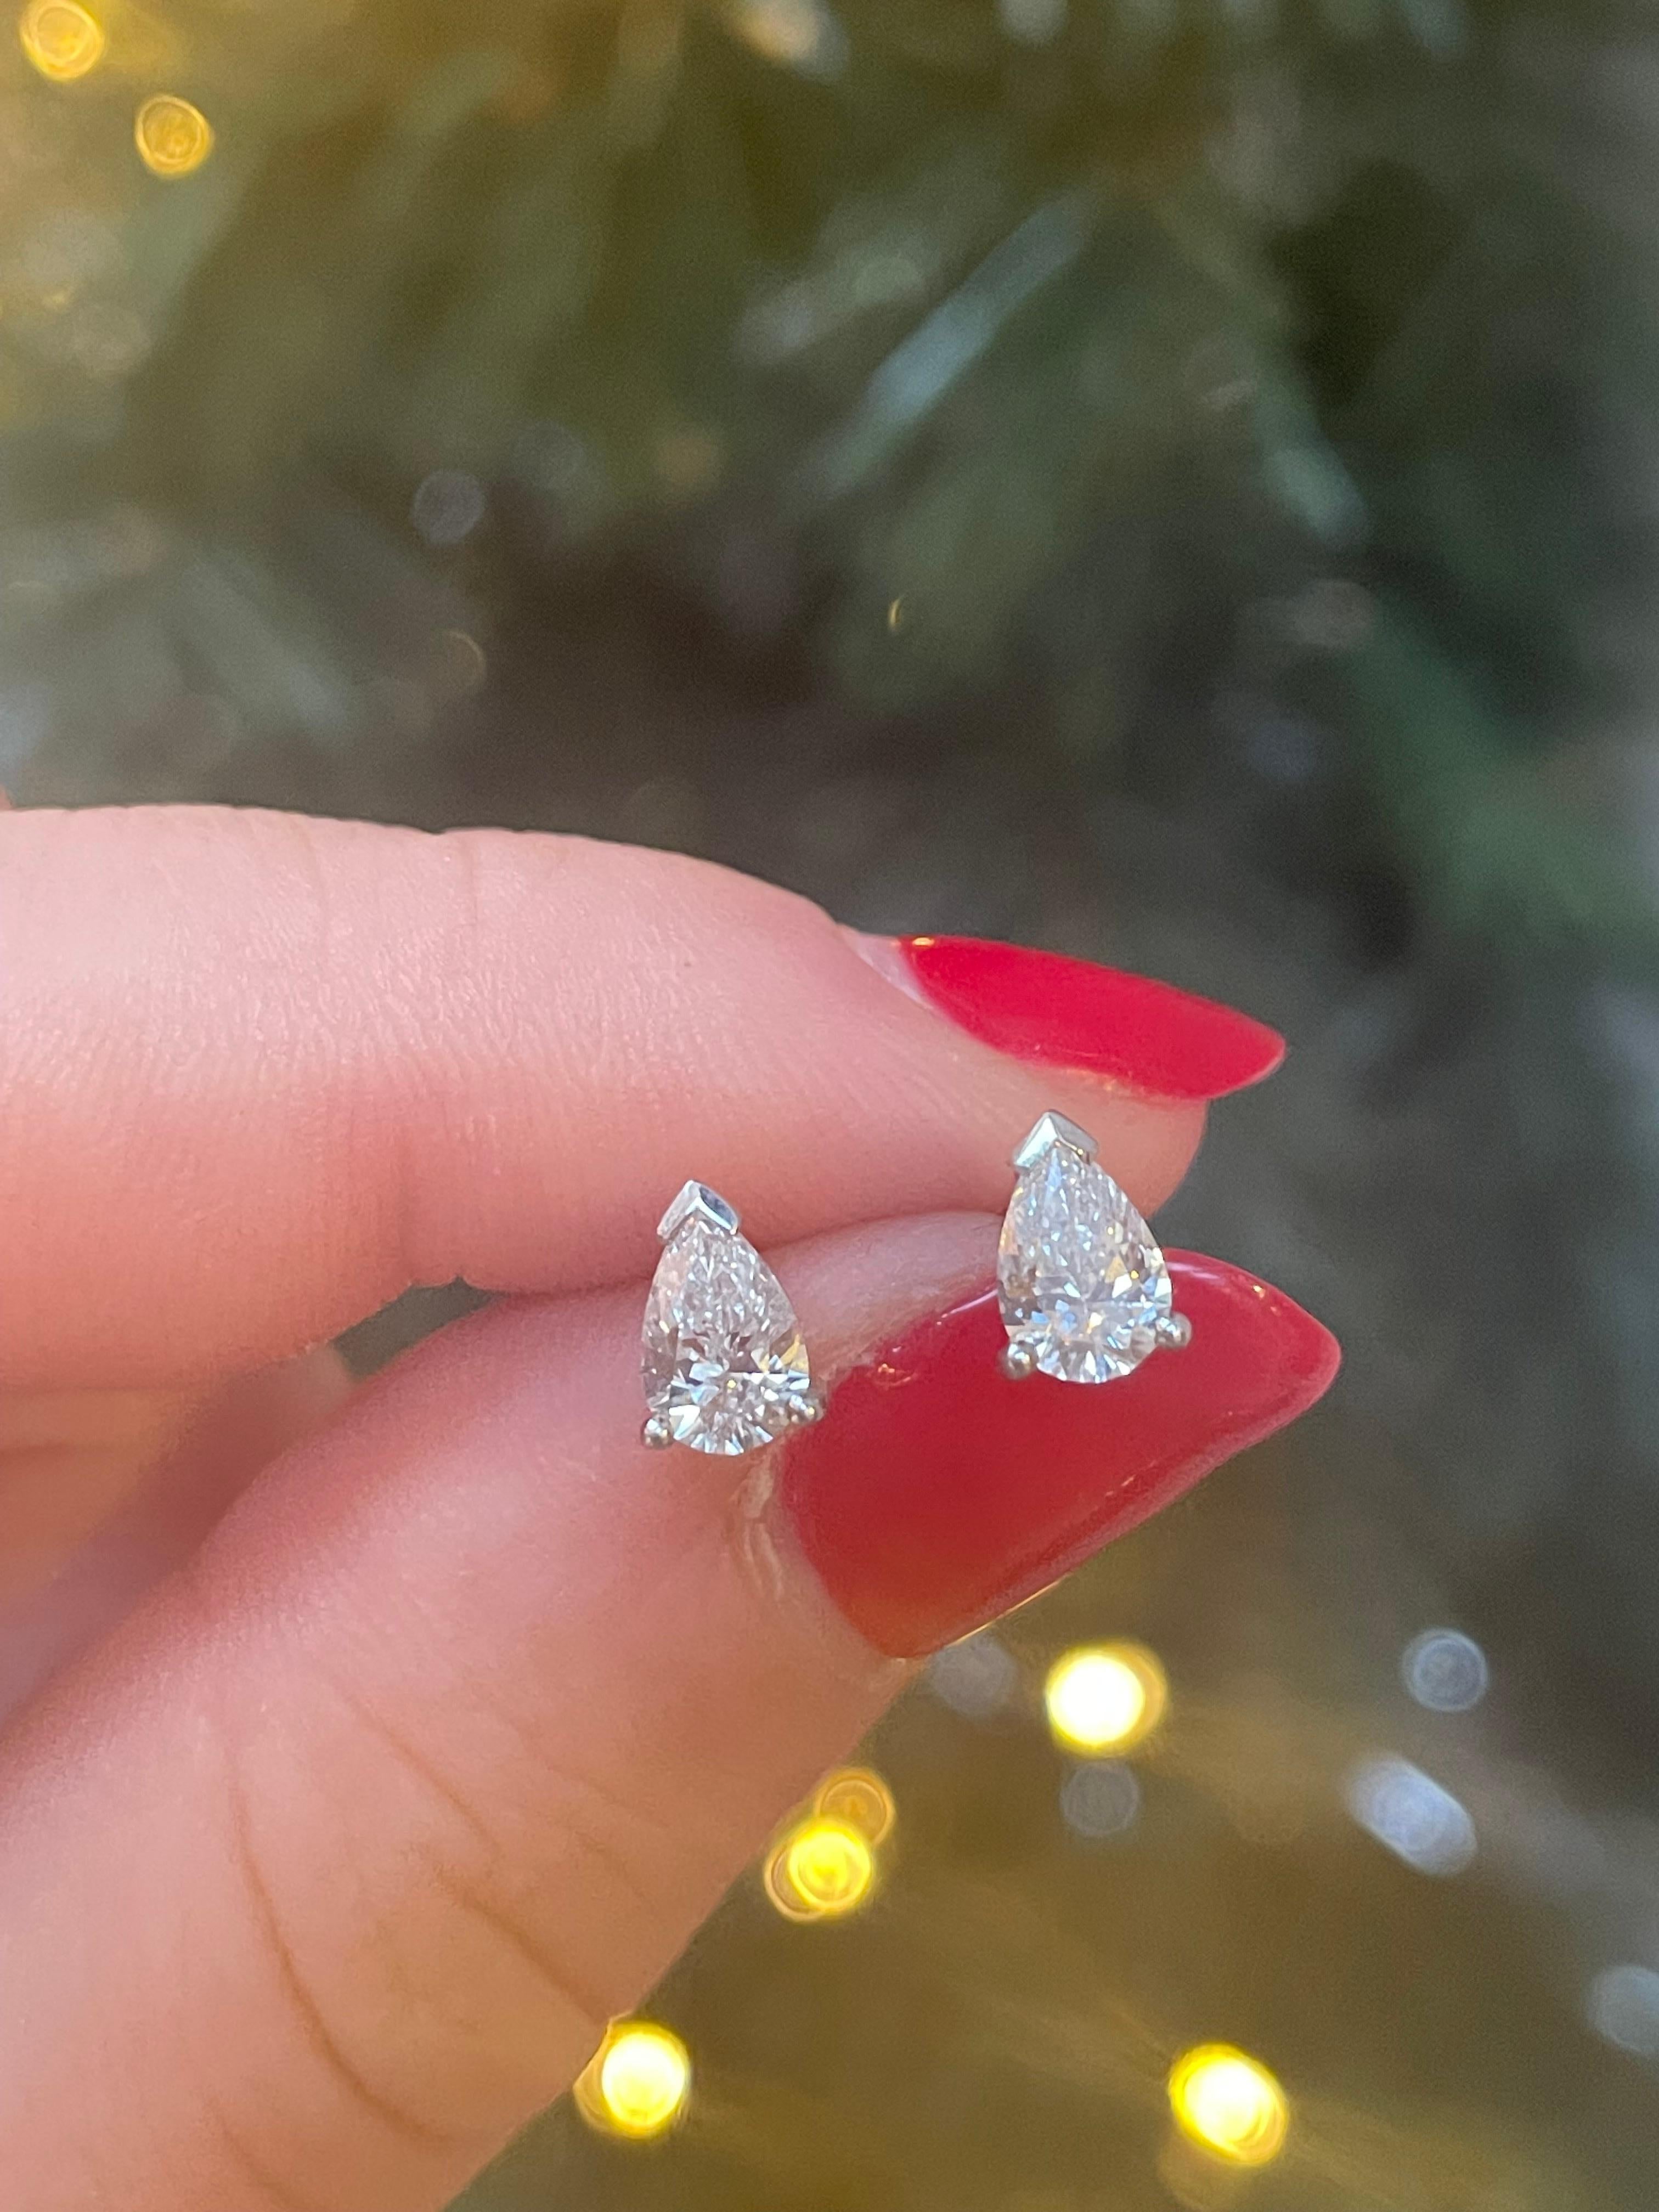 A pair of 0.82ct pear brilliant cut diamond stud earrings in 18 karat white gold.

Each earring is simply set with a pear brilliant cut diamond securely set within three claws. 

A perfect pair of studs to be worn everyday earrings, their pear